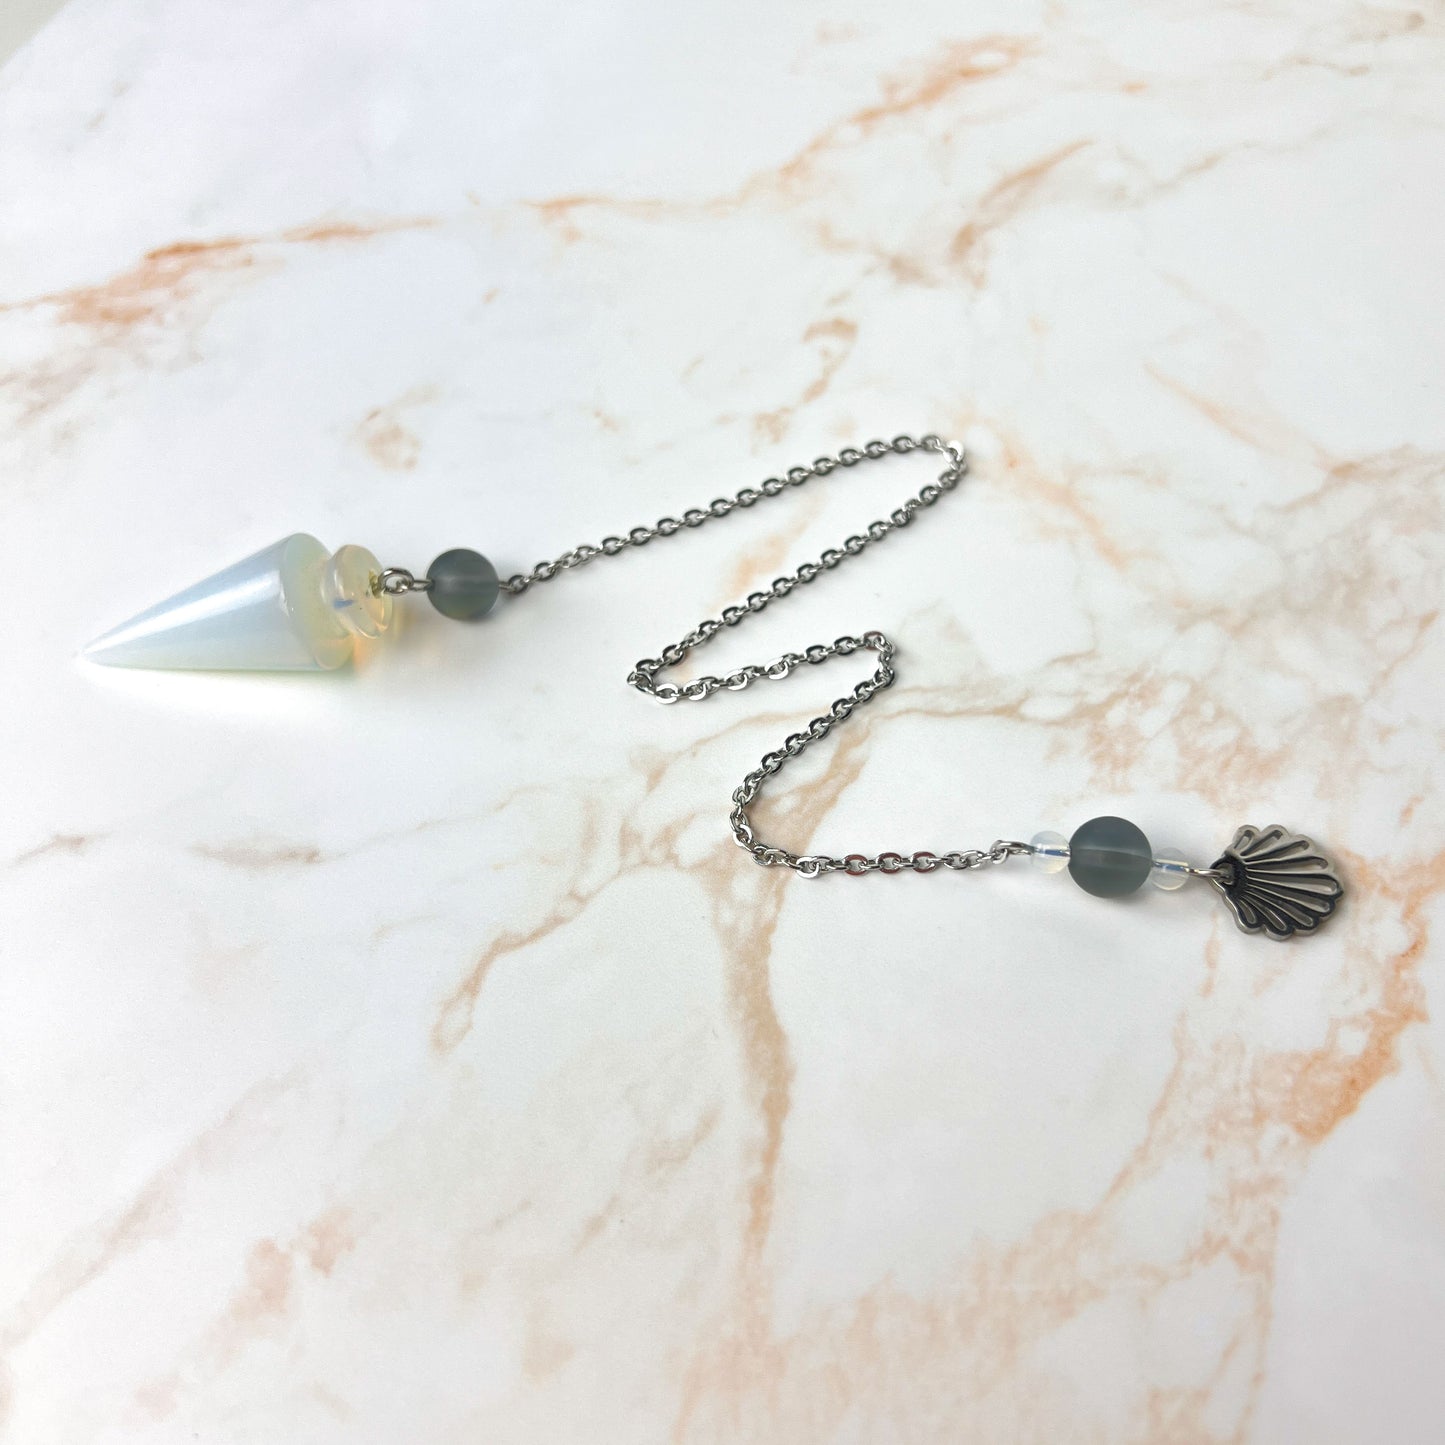 Sea witch pendulum made with opalite, stainless steel and mermaid glass Baguette Magick